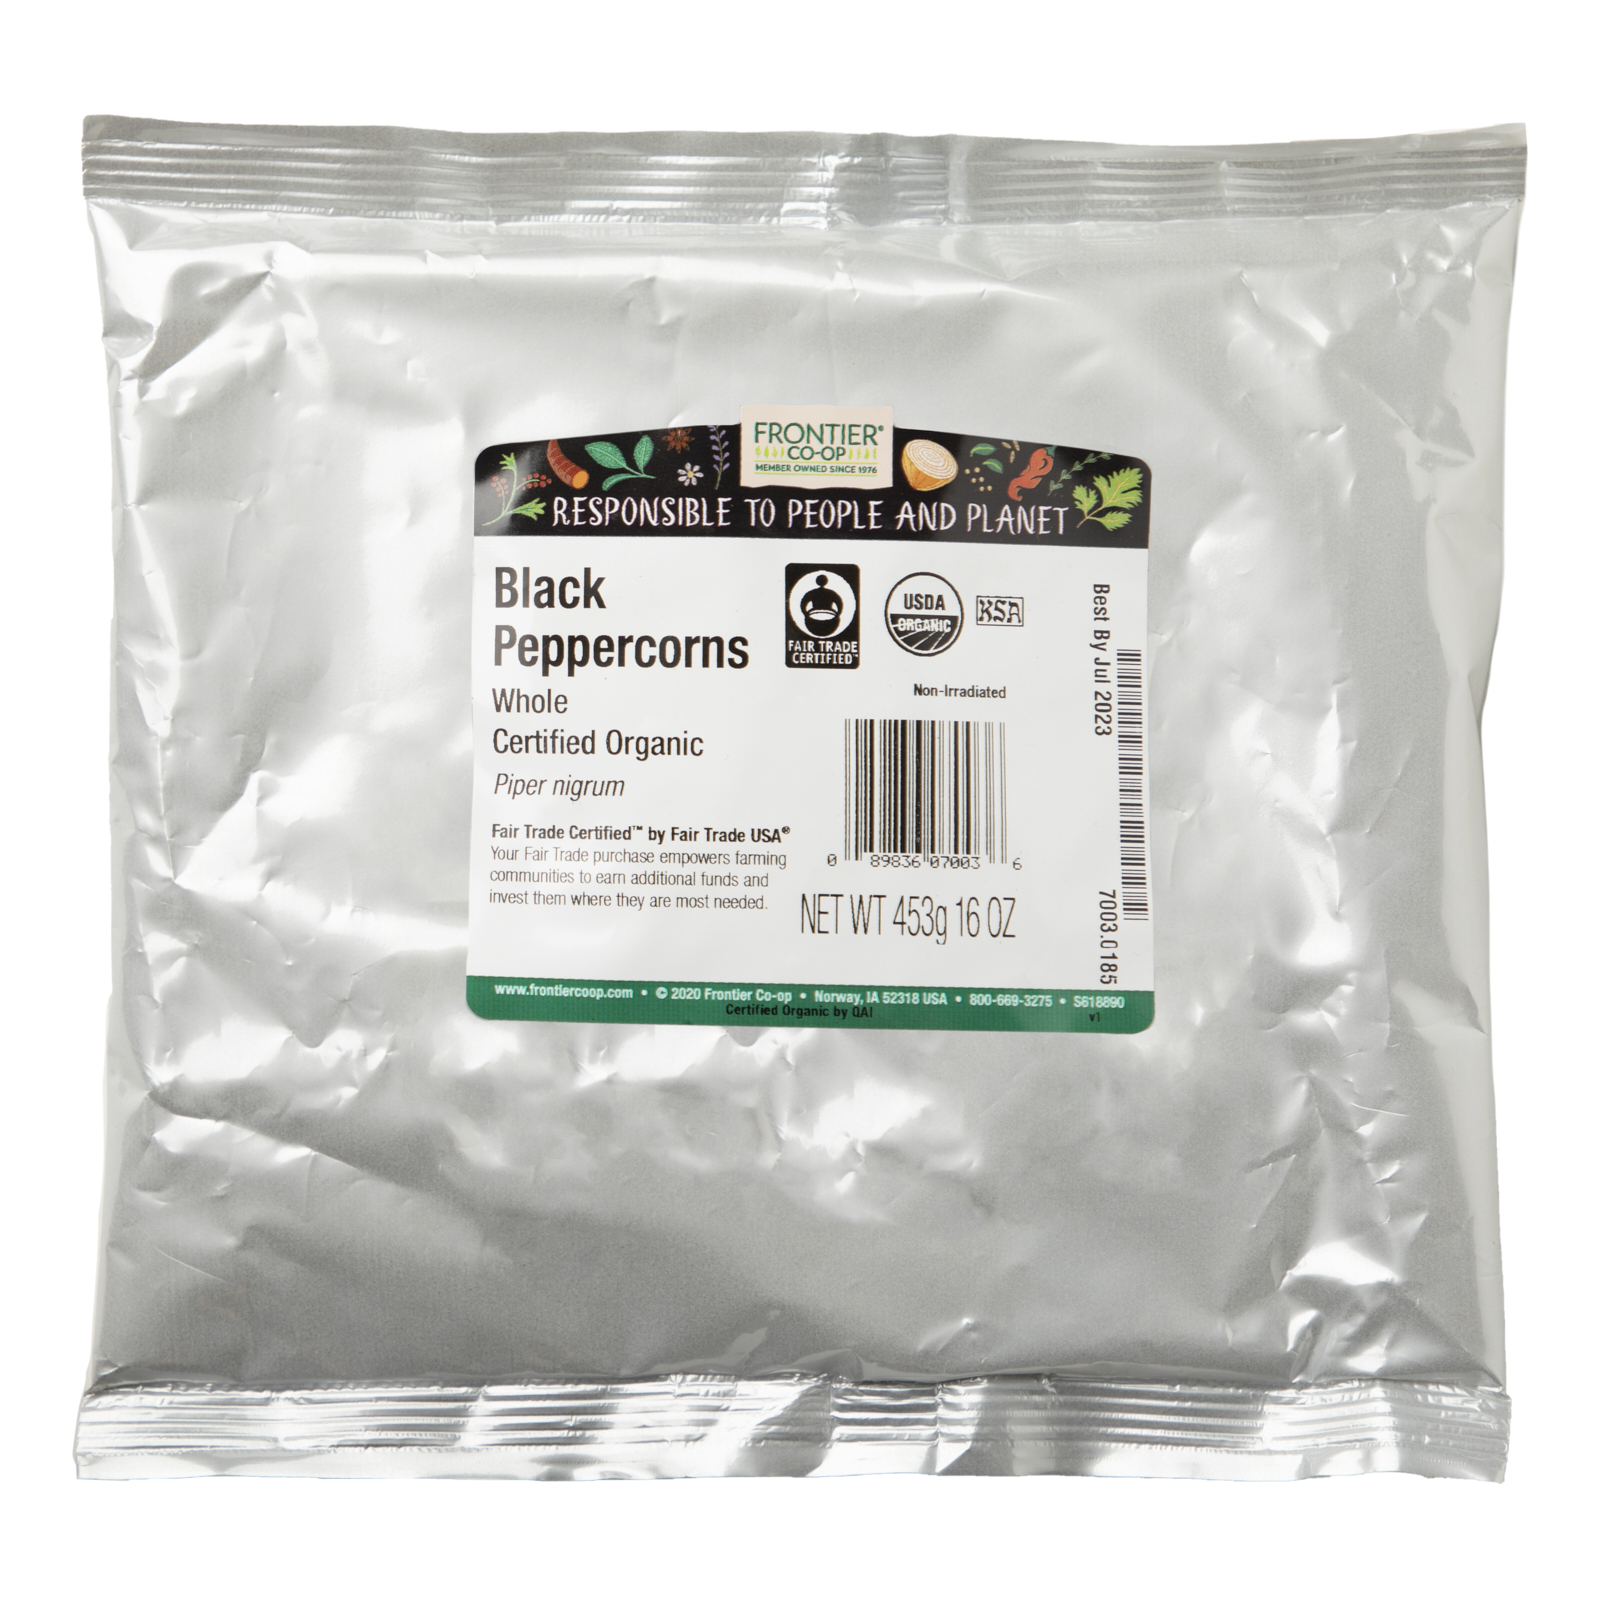 Frontier Co-op Whole Black Peppercorns, Spices, 16 oz. - image 3 of 7